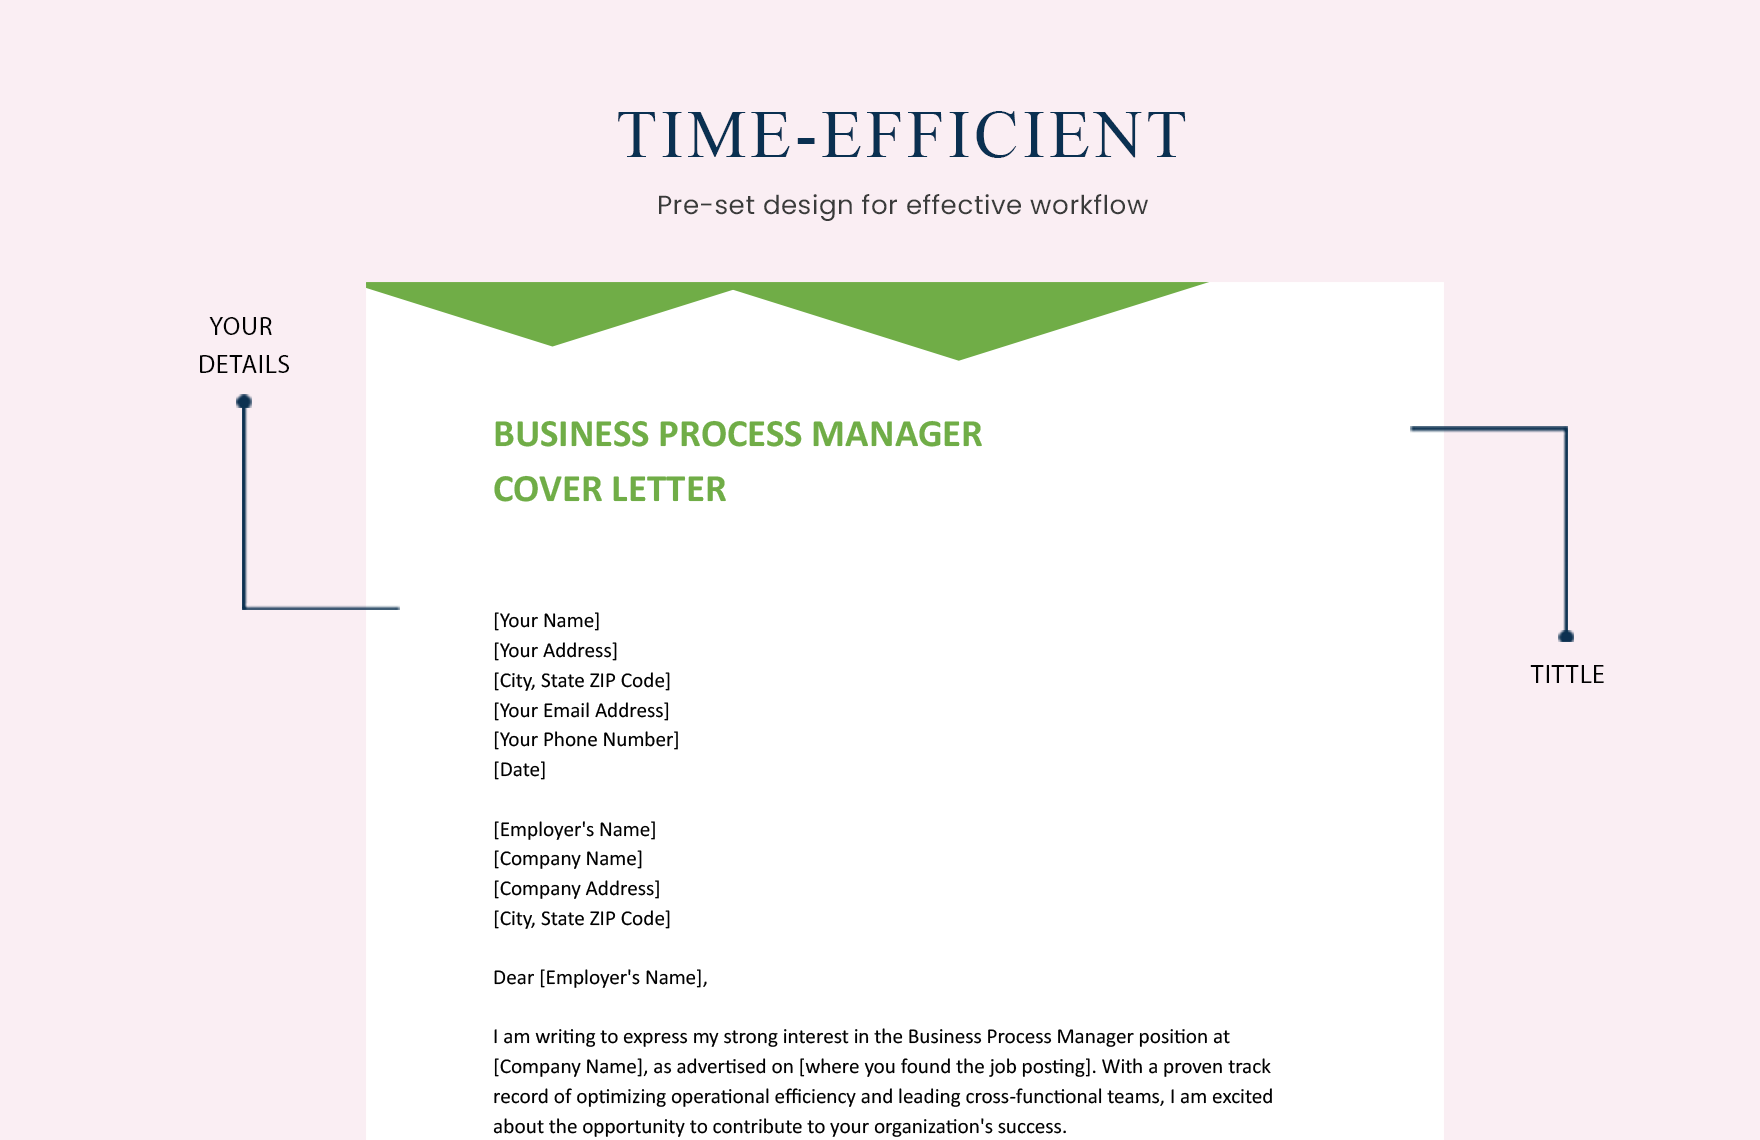 Business Process Manager Cover Letter